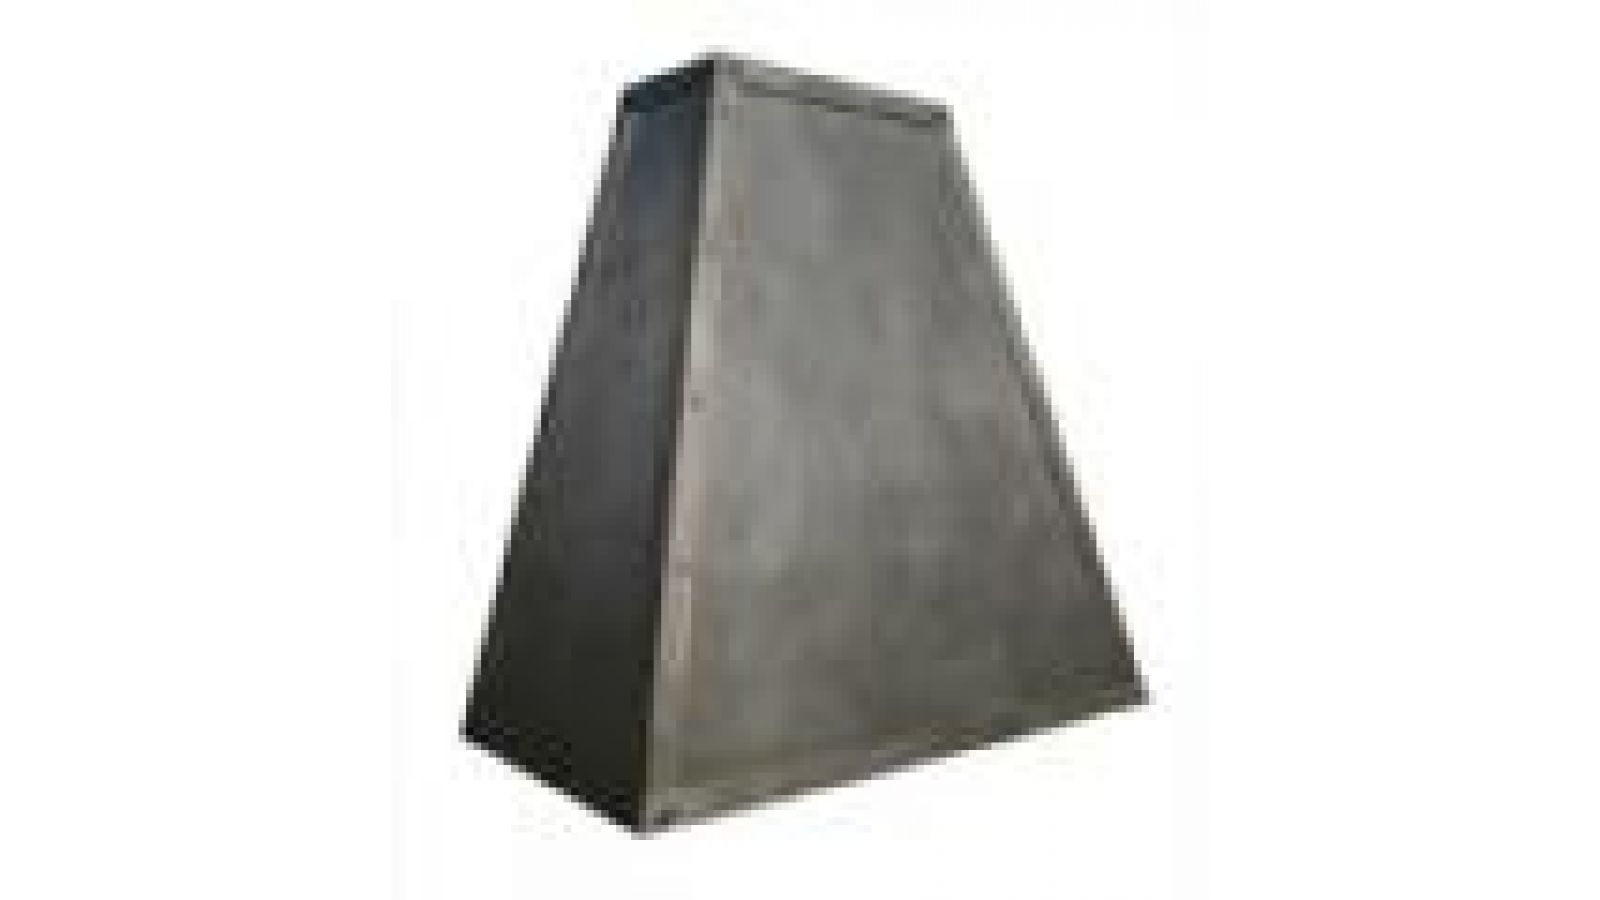 Distressed Steel Pyramid Hood with Rivets, Clavos,